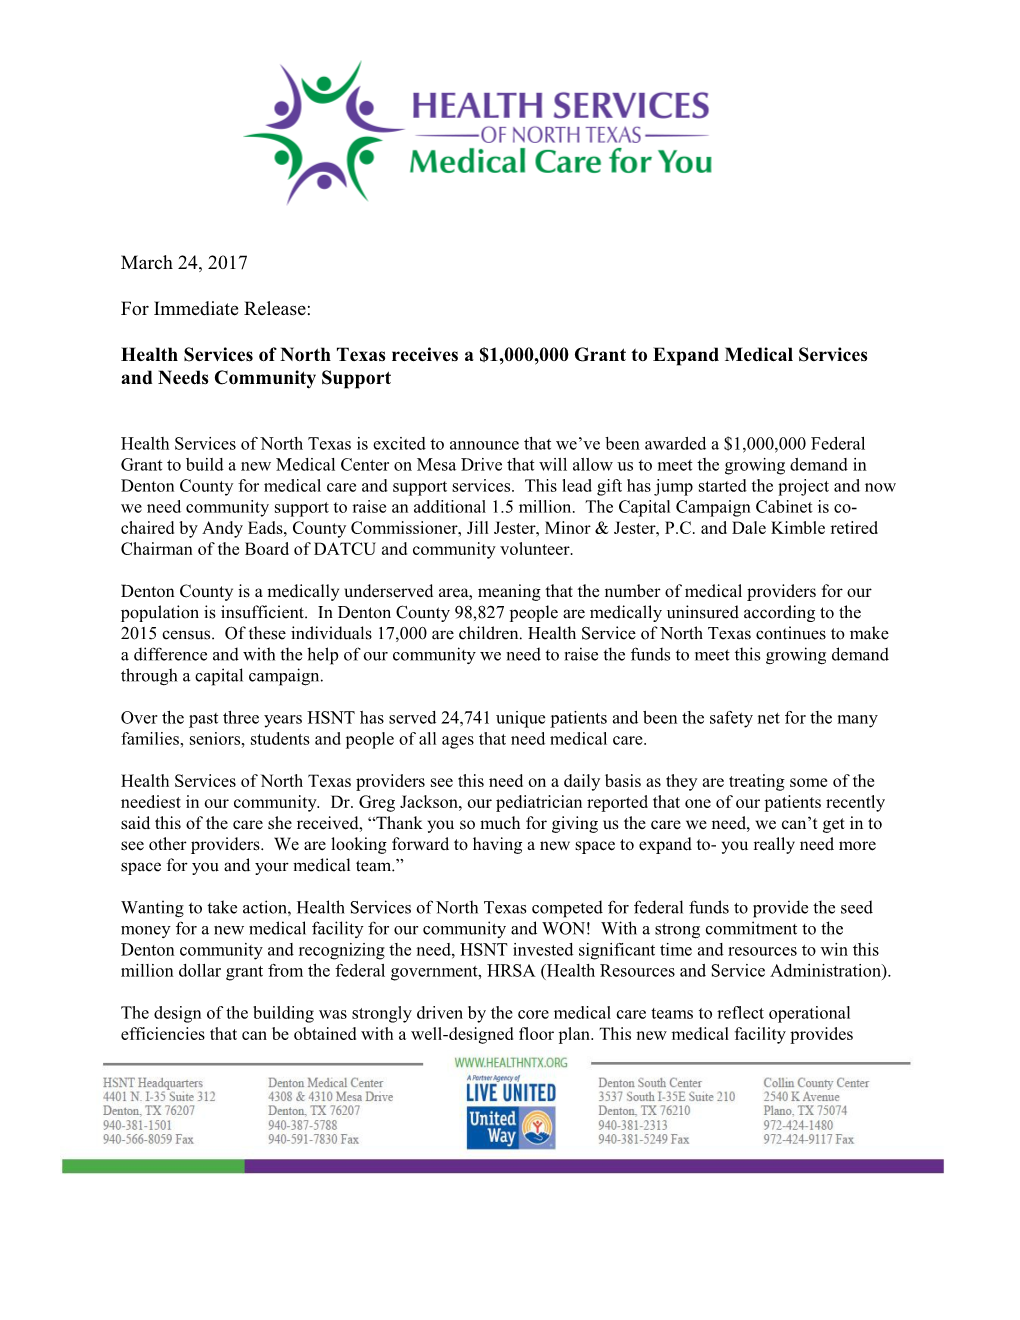 Health Services of North Texas Receives a $1,000,000 Grant to Expand Medical Services